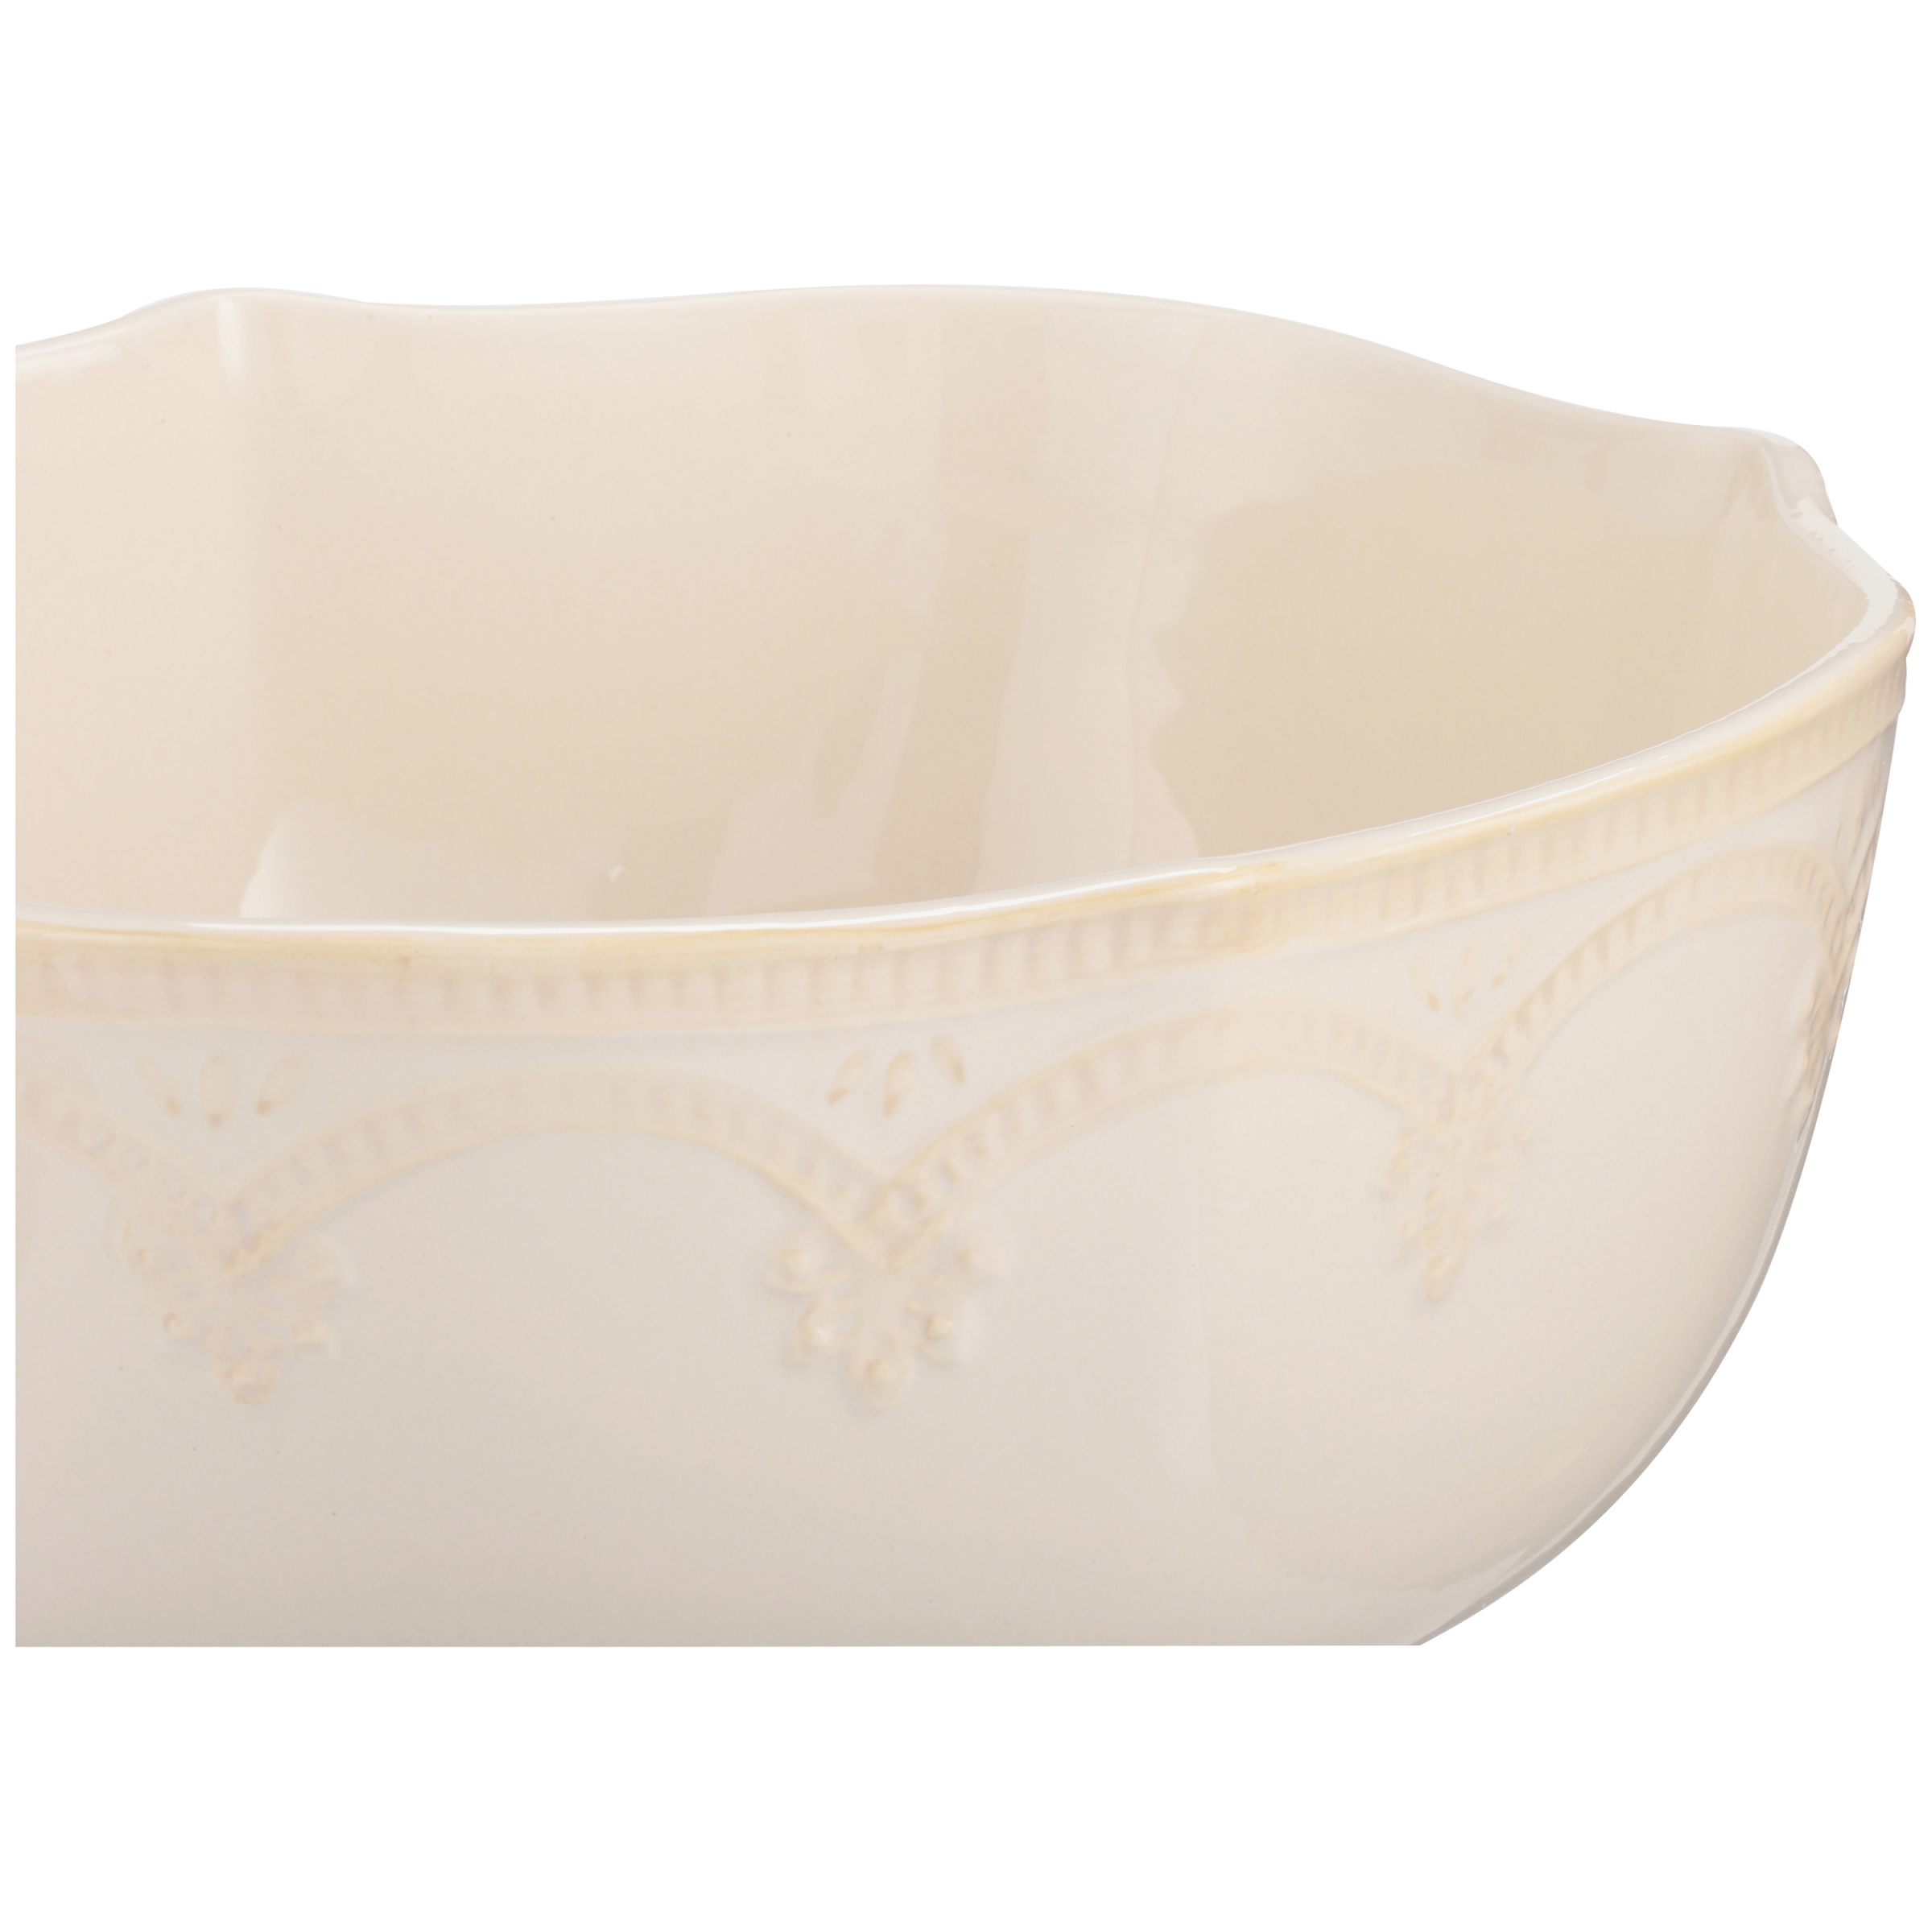 The Pioneer Woman Farmhouse Lace 10-Inch Serving Bowl, Linen - image 4 of 9